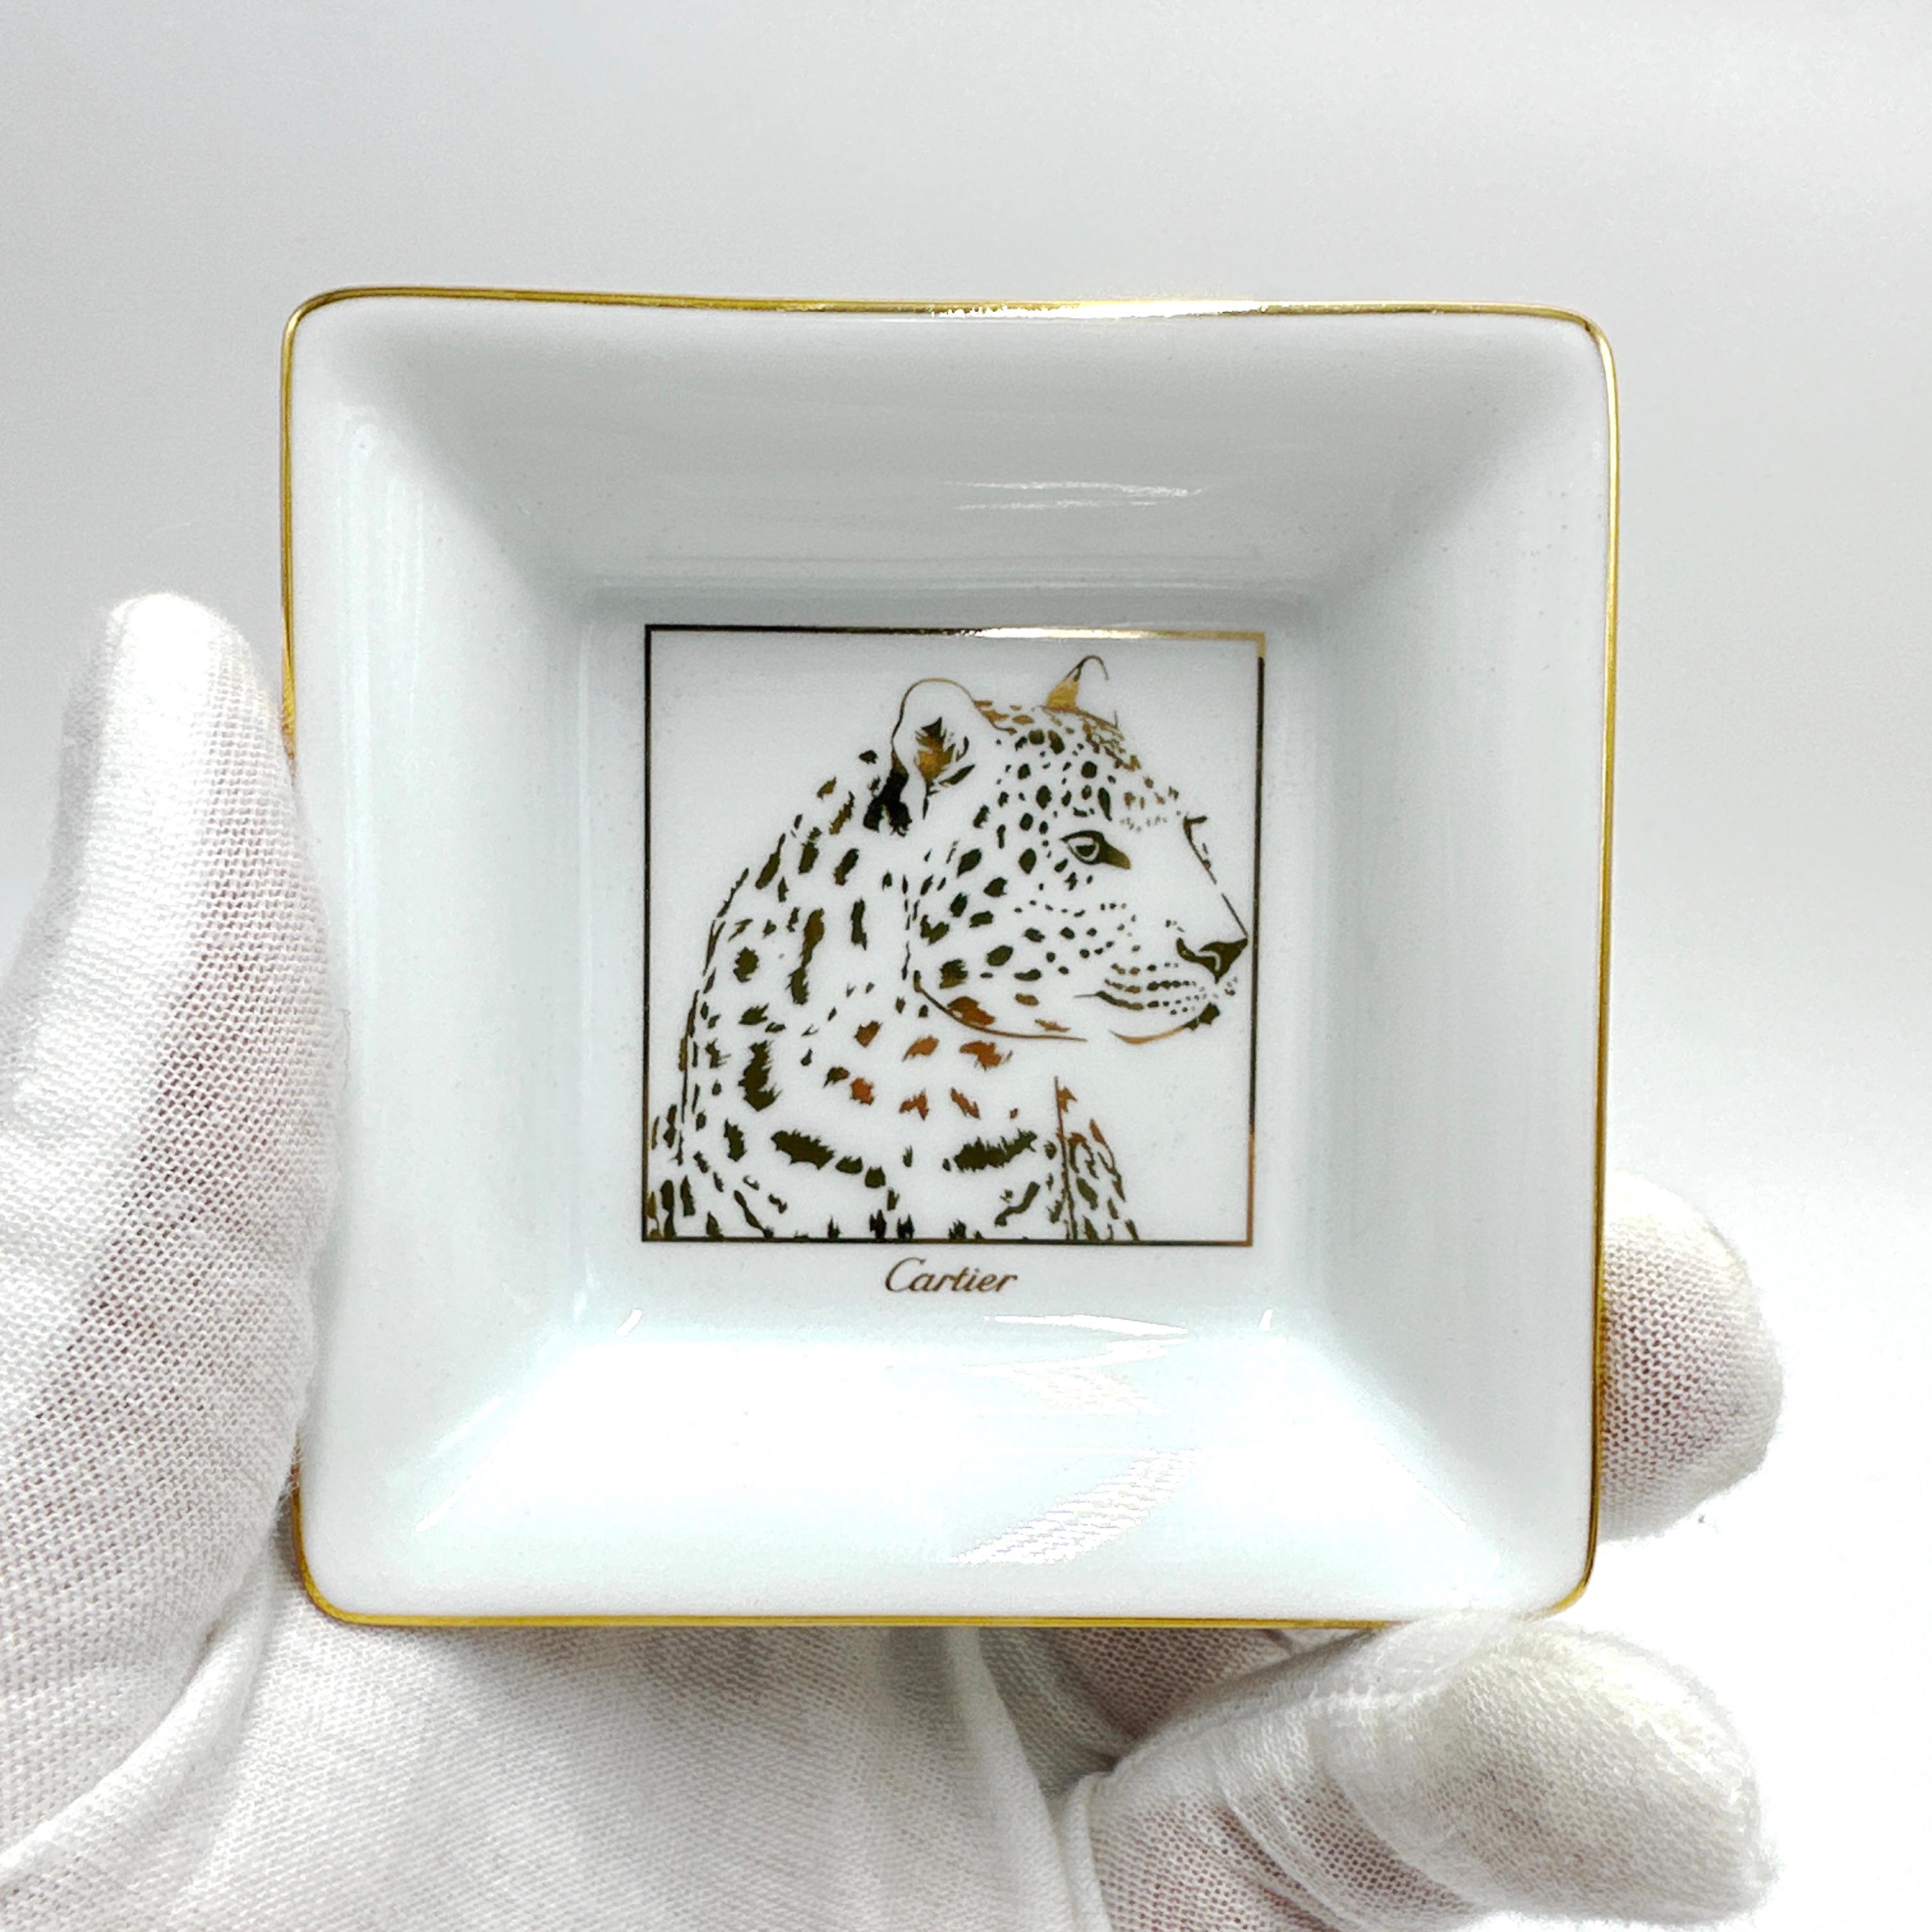 Here is a lovely CARTIER Panther Motif Porcelain Trinket Tray. This tray features a gold finish and showcases a beautiful Panther motif. Stamped Made in France on verso. 

These trays are typically given as gifts from Cartier for purchasing a more